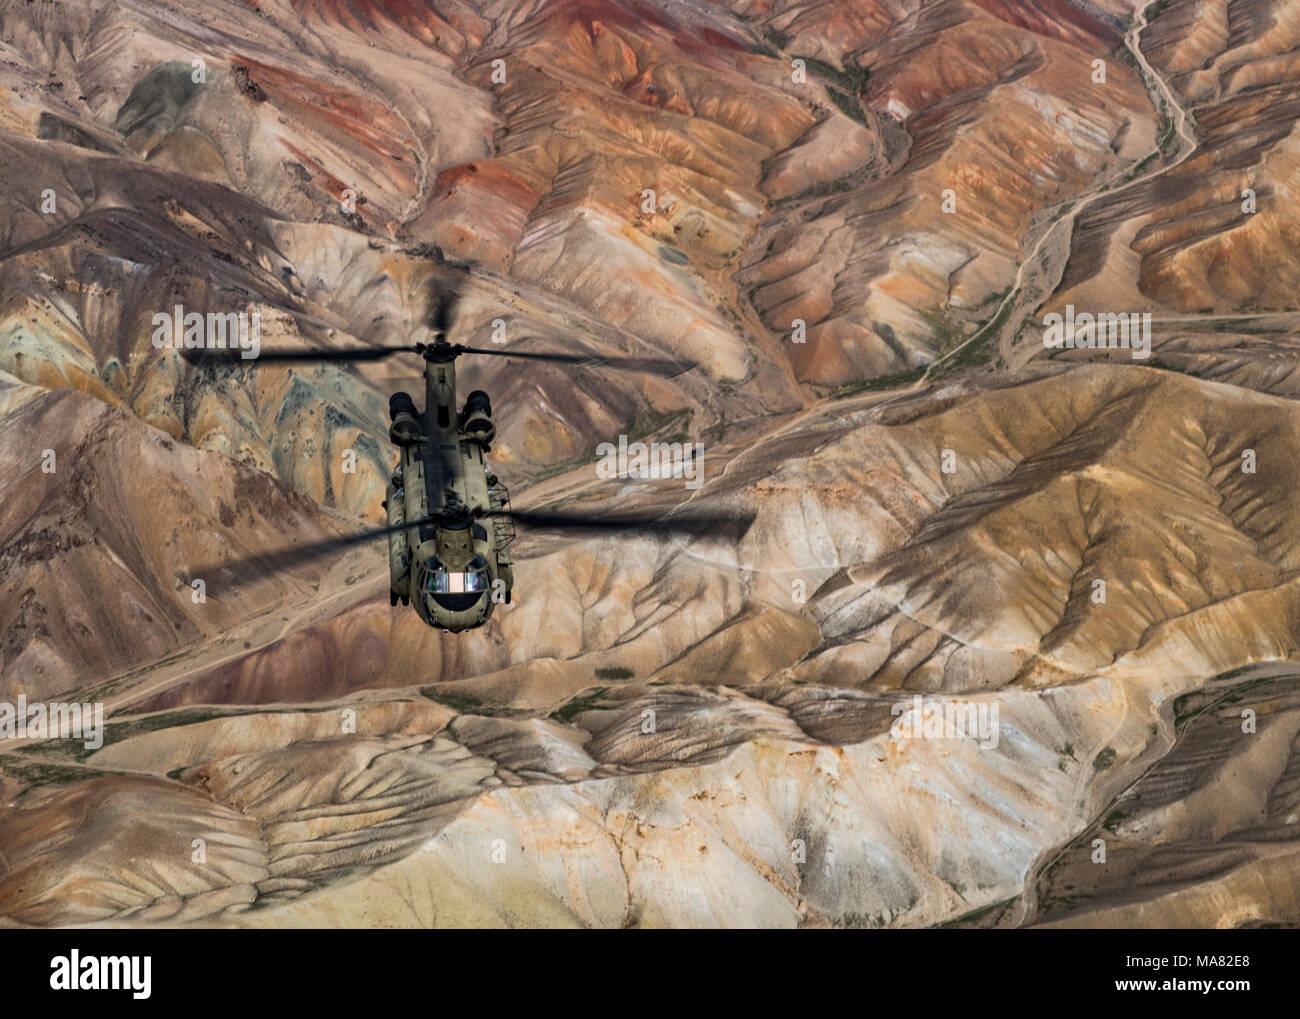 A U.S. Army Task Force Brawler CH-47F Chinook flies while conducting a training exercise with a Guardian Angel team assigned to the 83rd Expeditionary Rescue Squadron at Bagram Airfield, Afghanistan, March 26, 2018. The Army crews and Air Force Guardian Angel teams conducted the exercise to build teamwork and procedures as they provide joint personnel recovery capability, aiding in the delivery of decisive airpower for U.S. Central Command. (U.S. Air Force Photo by Tech. Sgt. Gregory Brook) Stock Photo